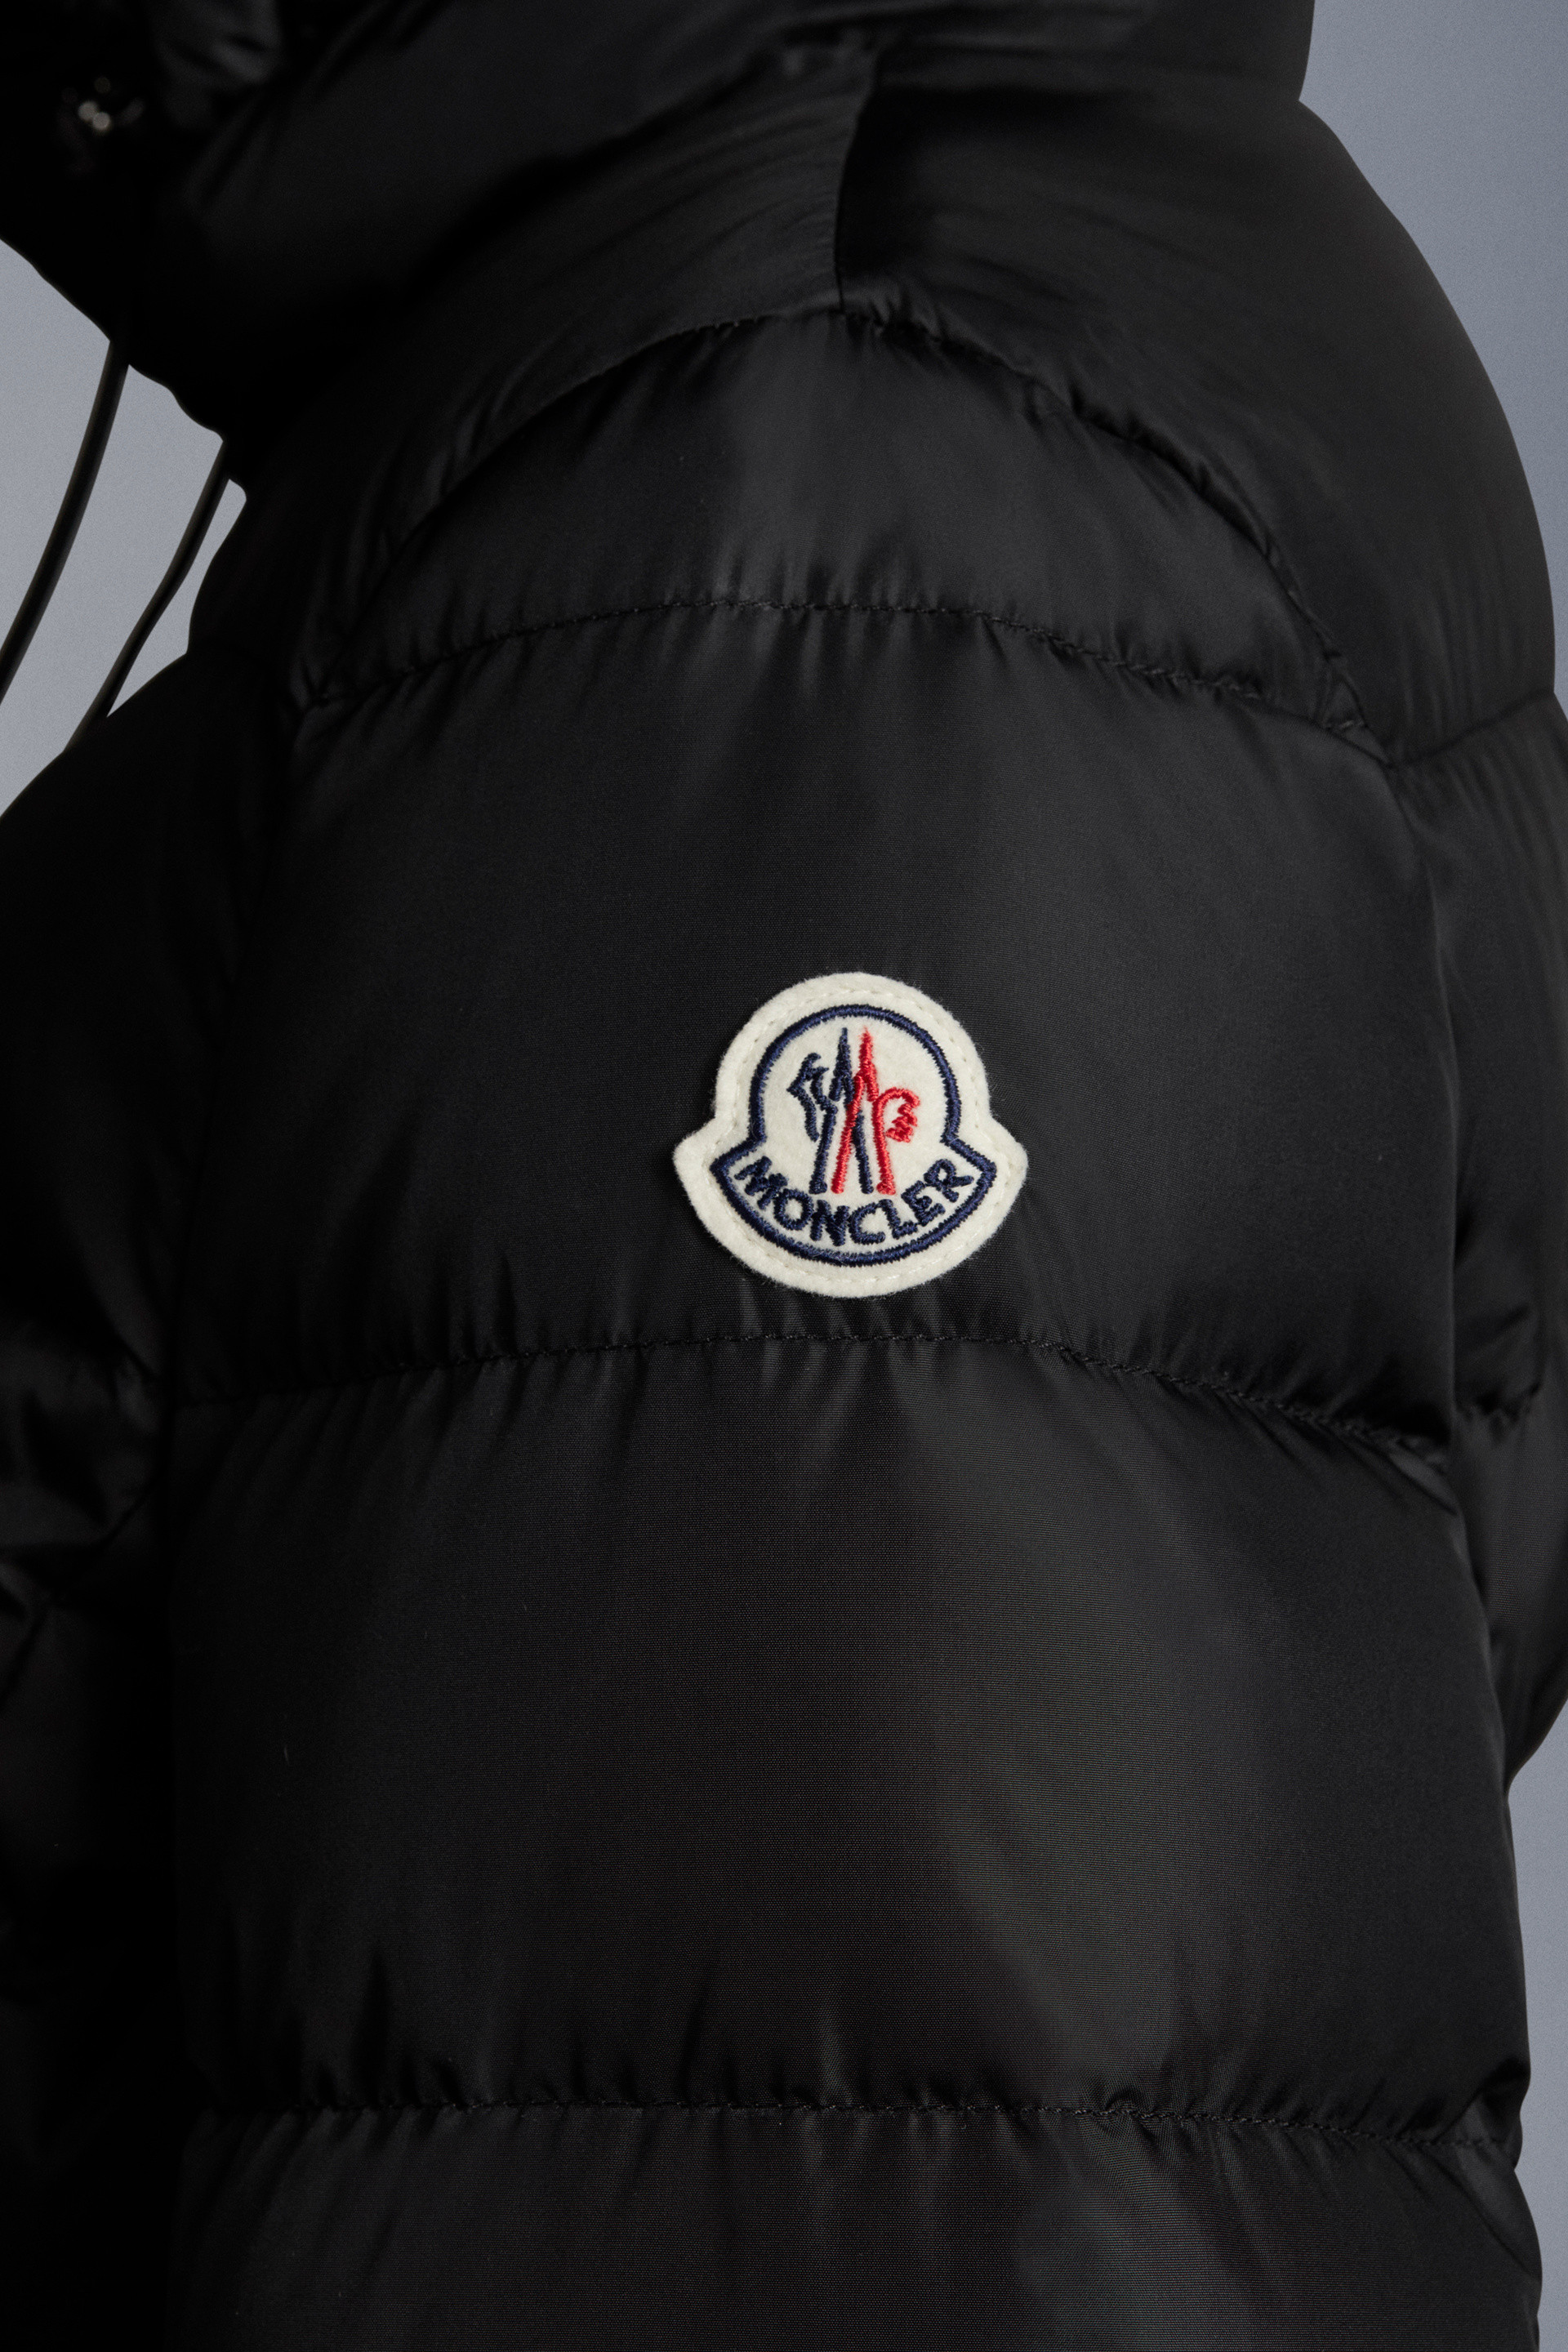 moncler jacket girl,OFF 76%,www.concordehotels.com.tr